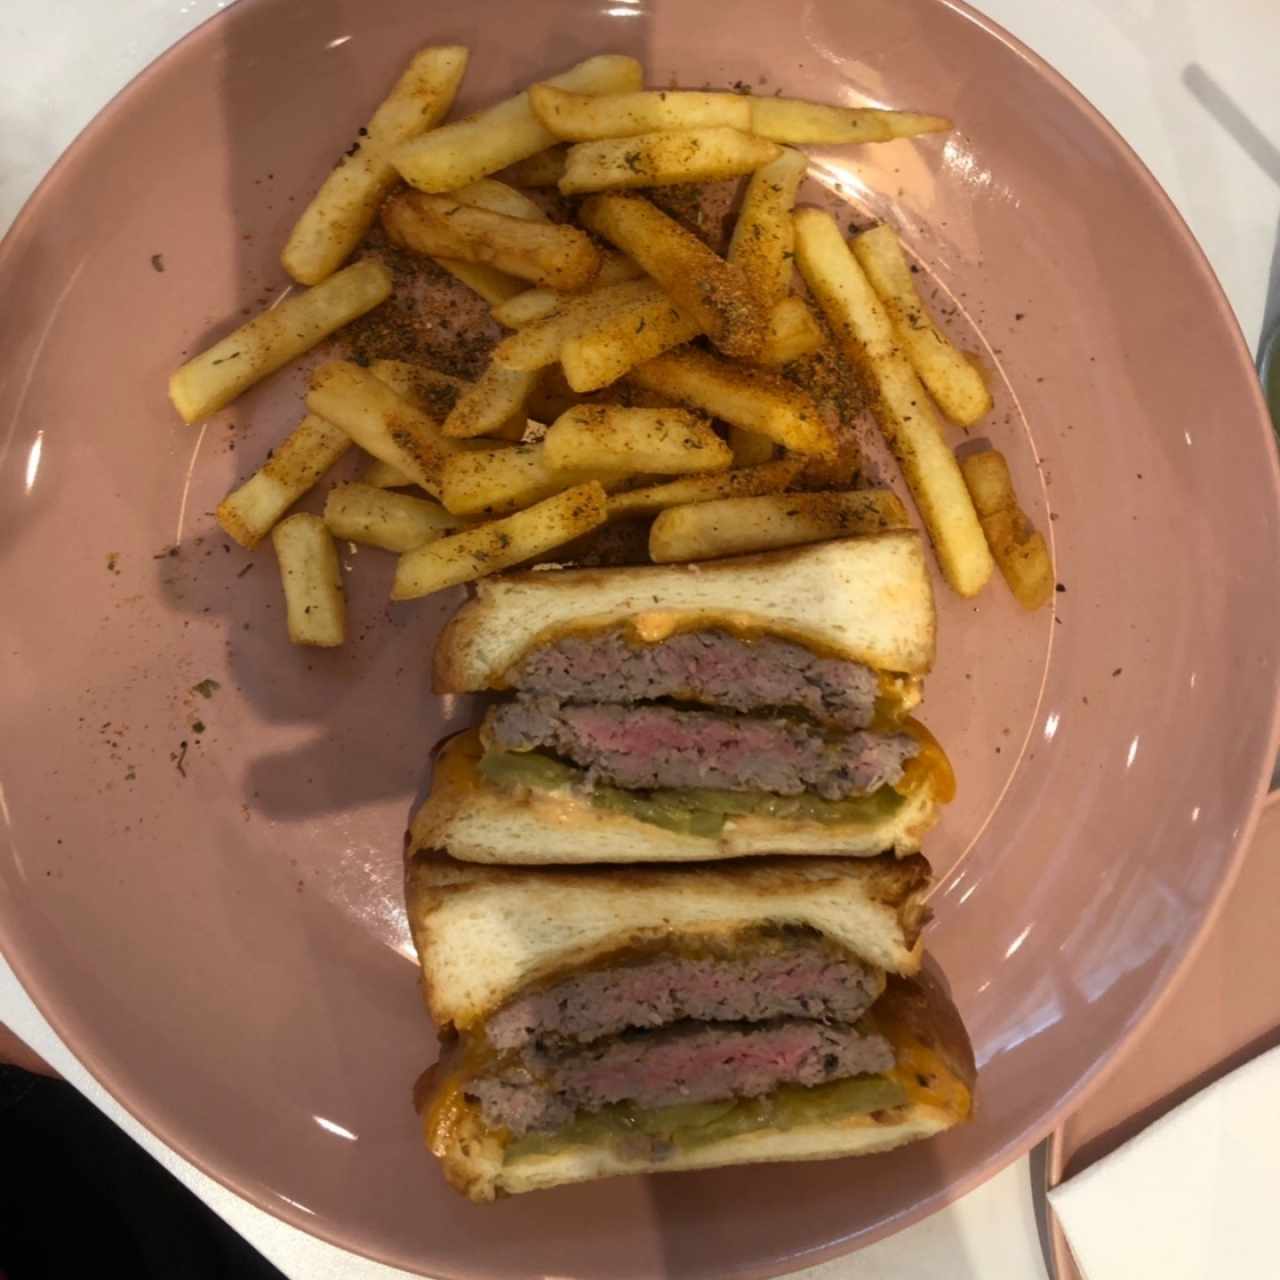 Double patty melt with spacy fries